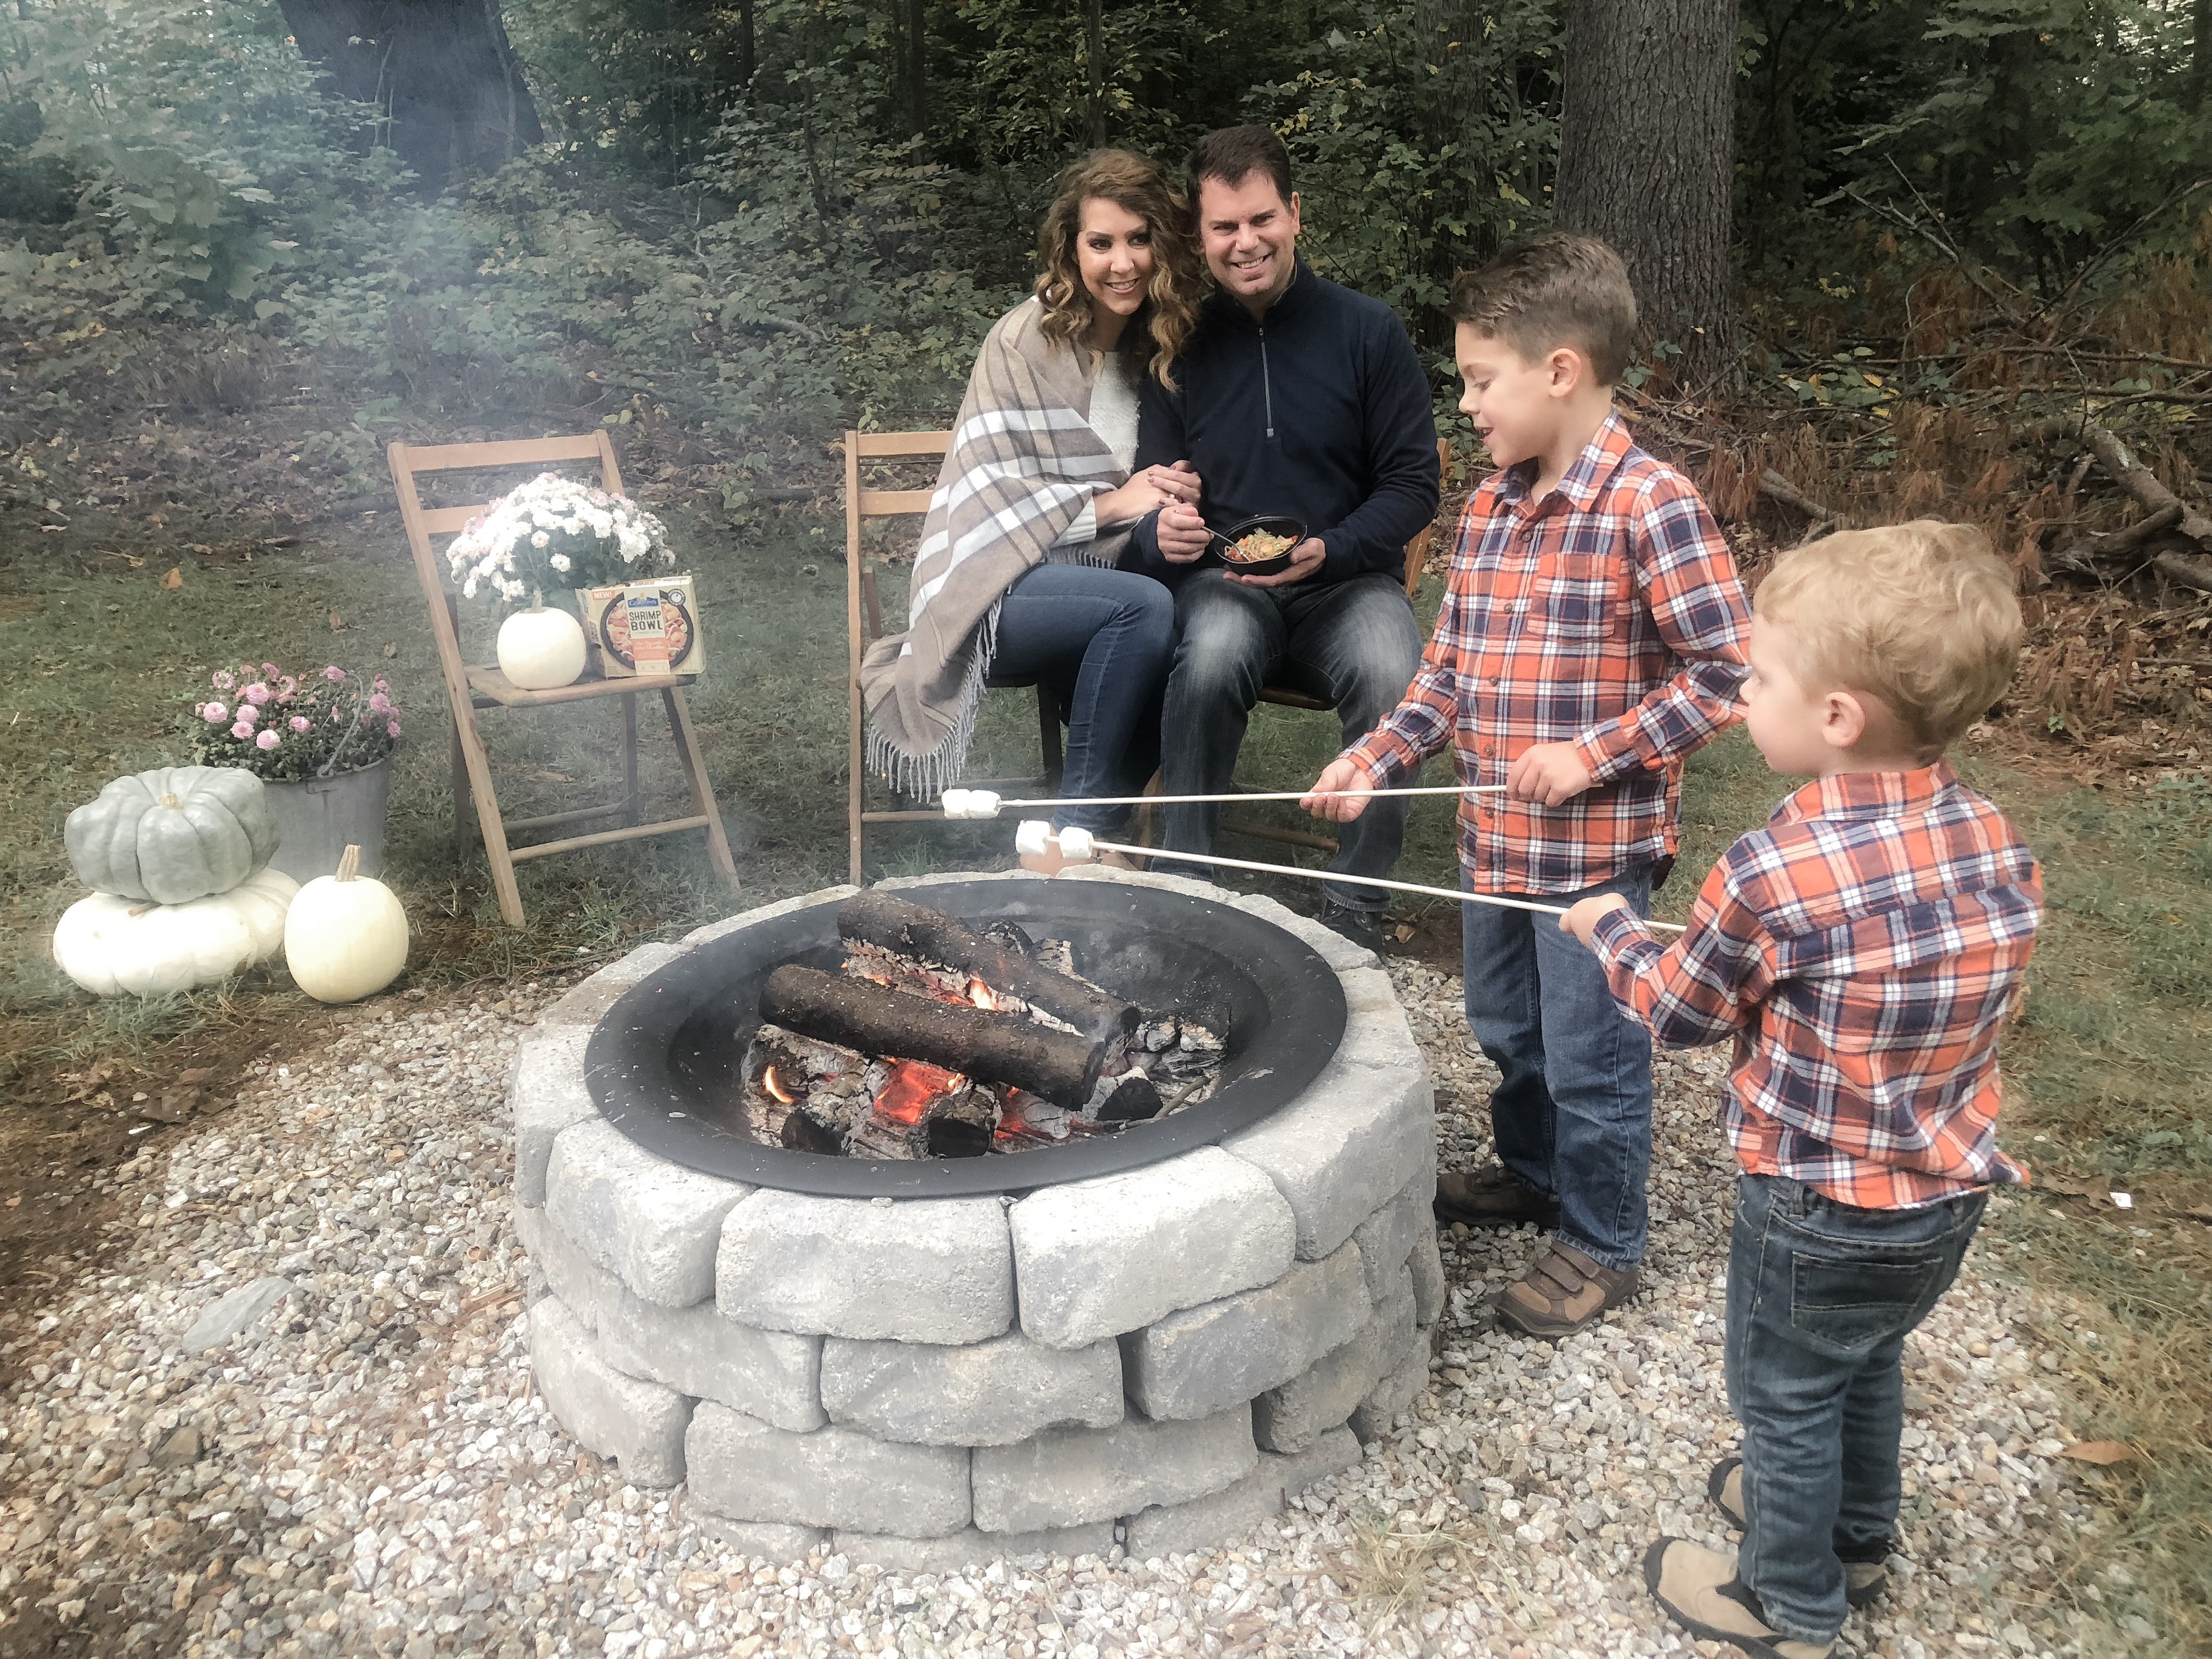 Fall Bucket List with Gorton's Seafood - Shrimp Bowls - S'mores and roasted marshmallows Family around Fire Pit - From the Family